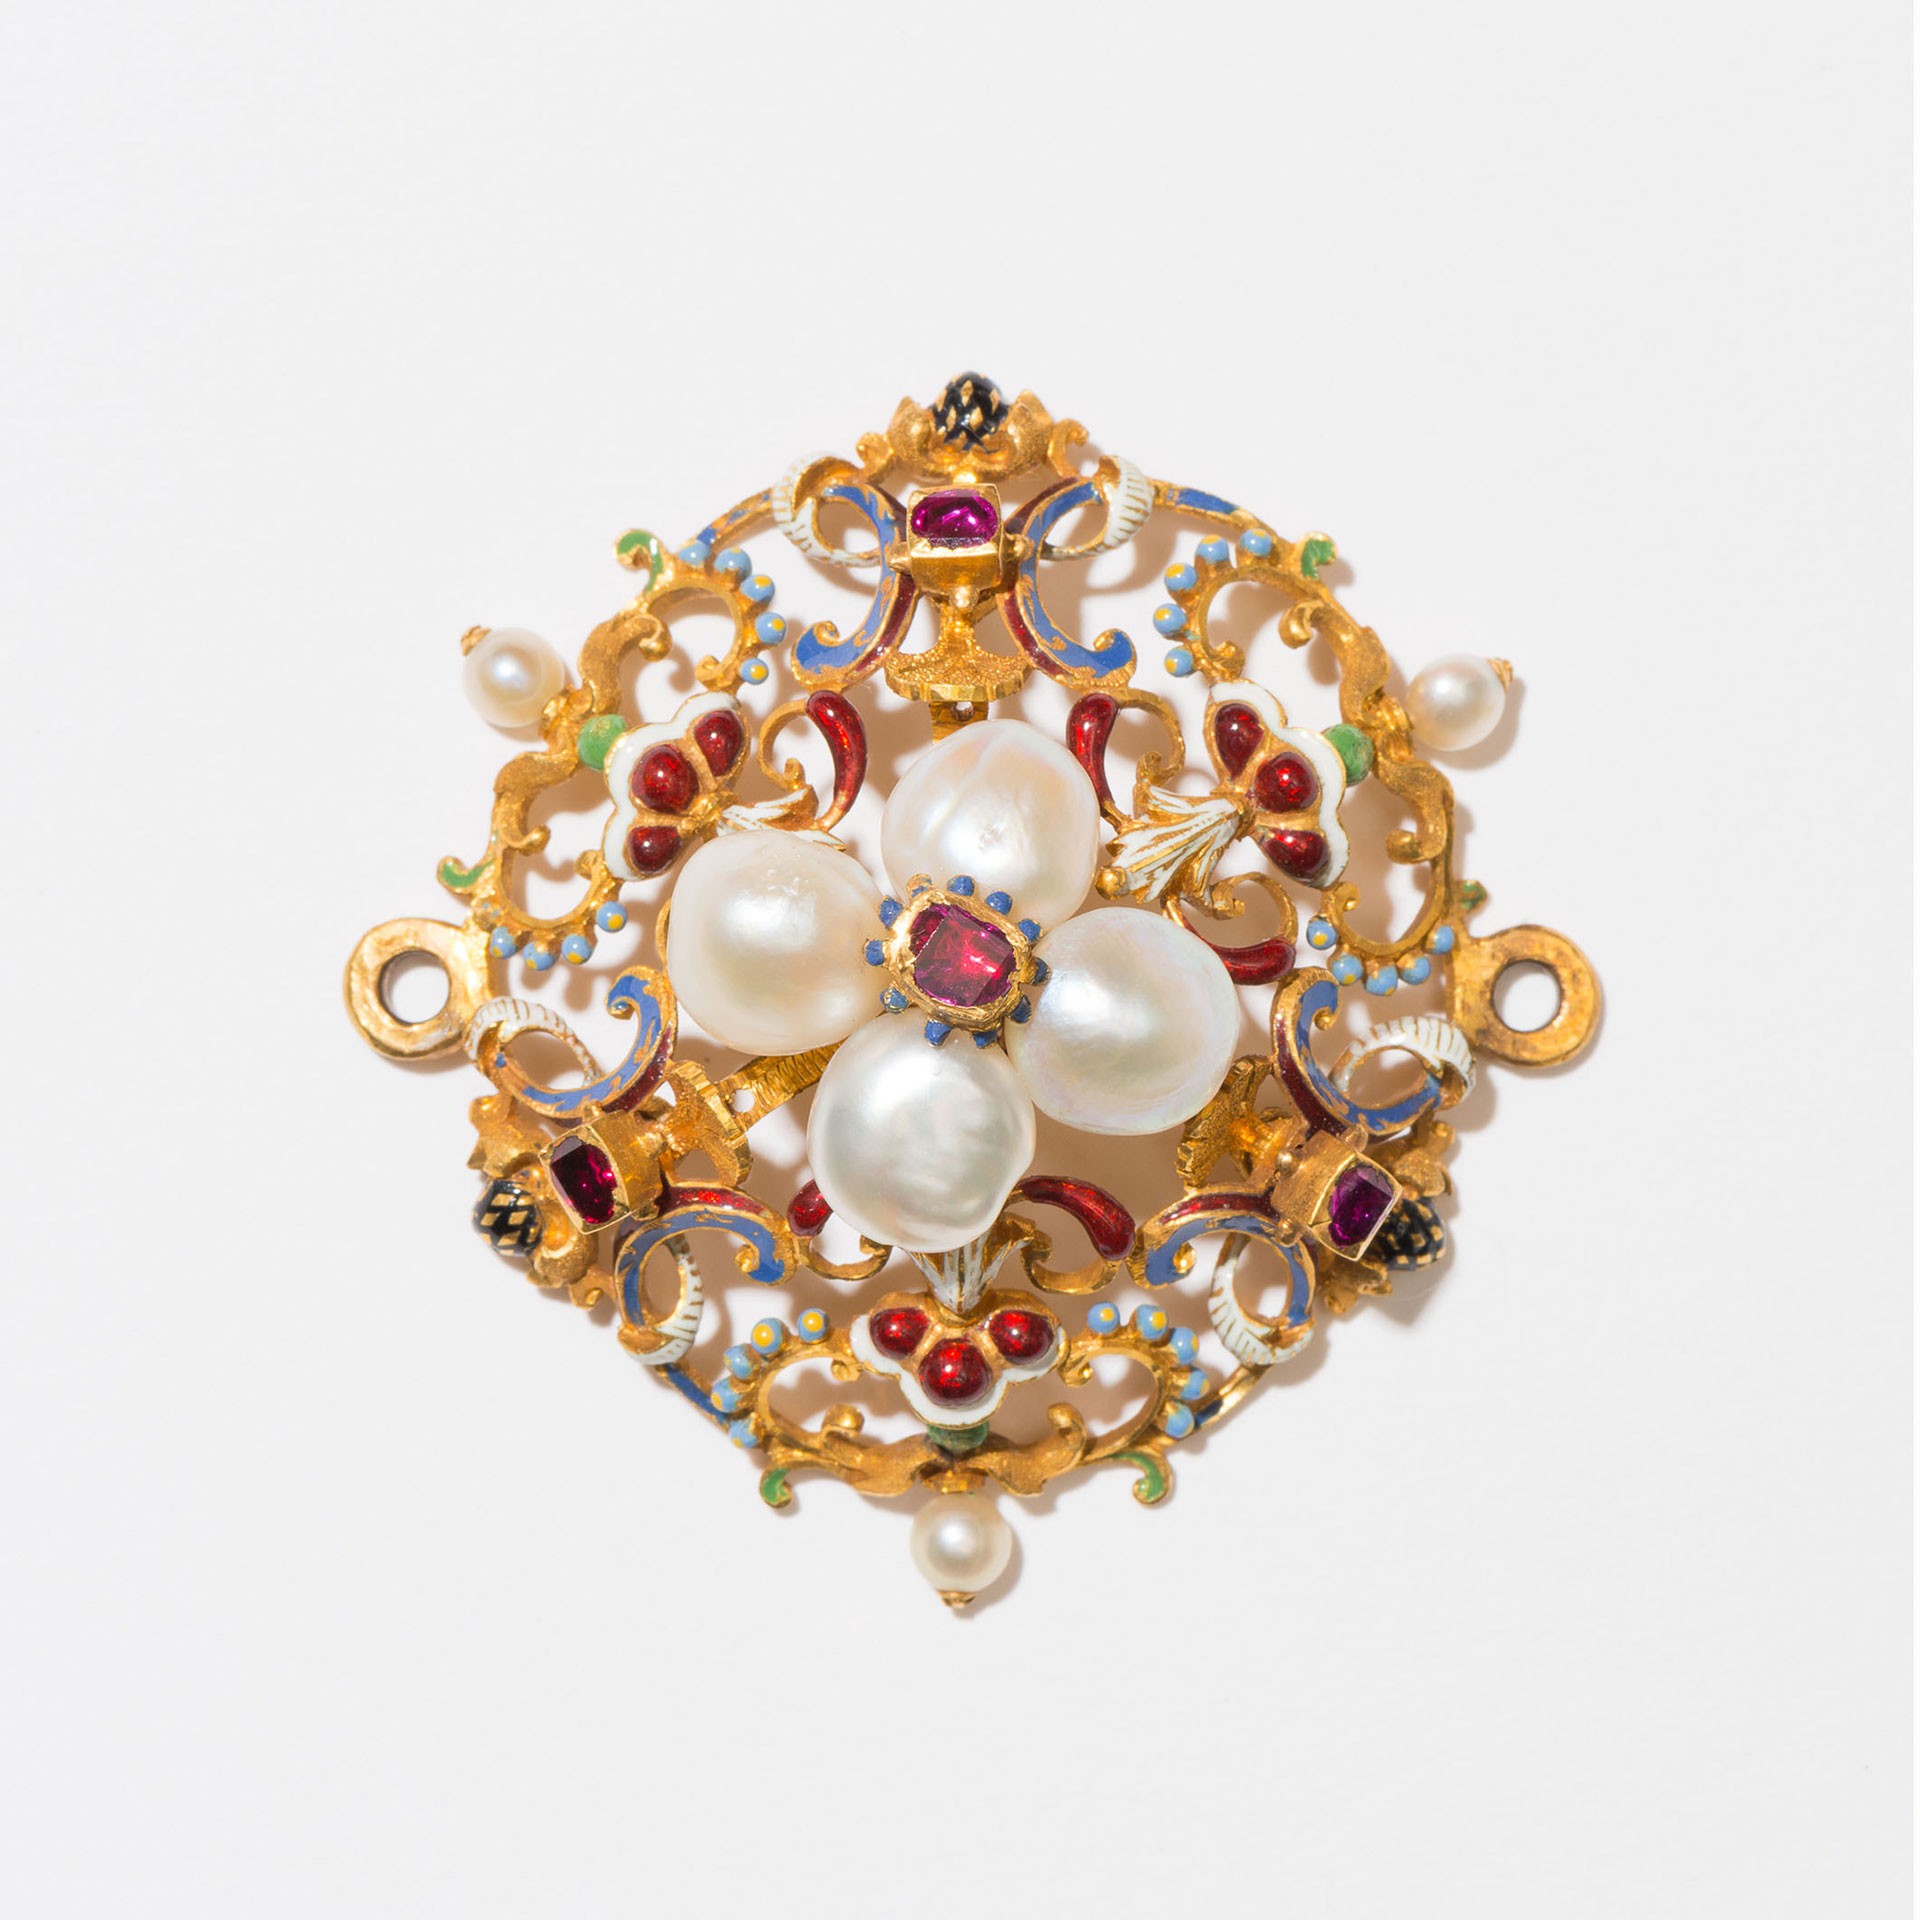 <BODY>Rosette from the Halle Jewelry, 1570–1580 © MAK/Nathan Murrell</BODY>